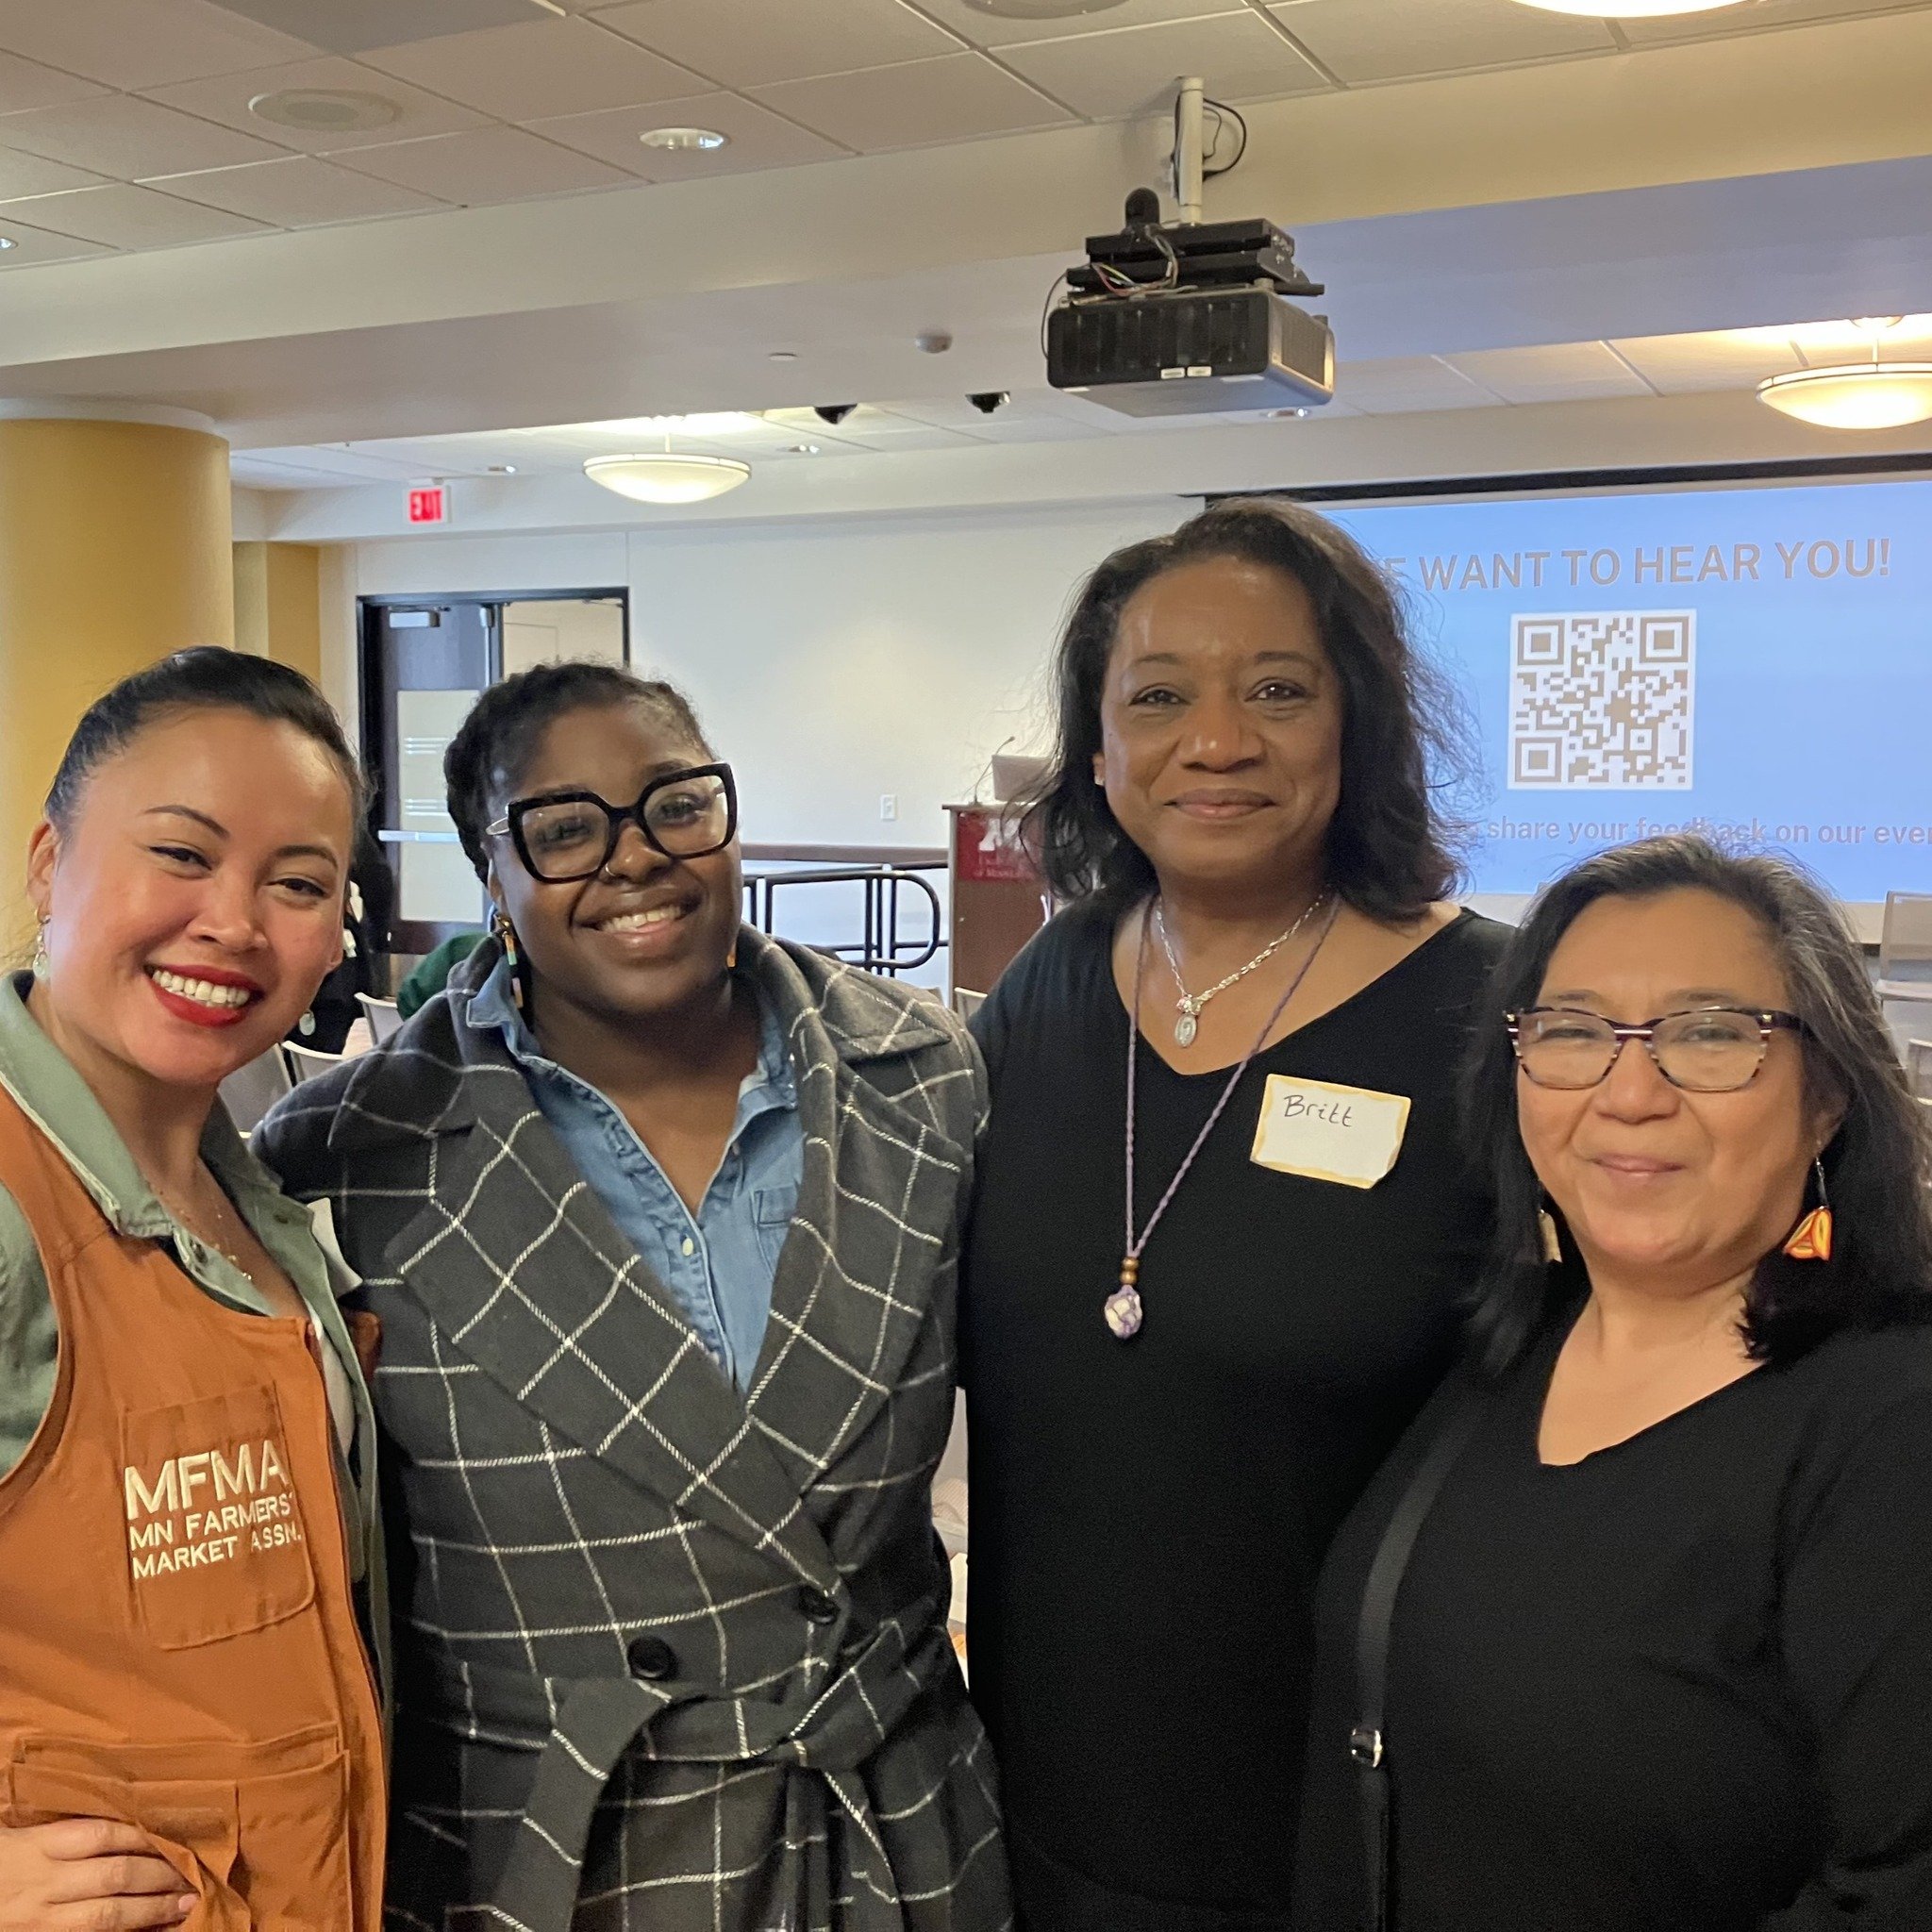 Great to attend the University of Minnesota Environmental Justice Summit last week with the Institute on the Environment Undergraduate Leaders Program, @brijh of BF50, Sina War of @mfmaorg and @pspnorthmpls!